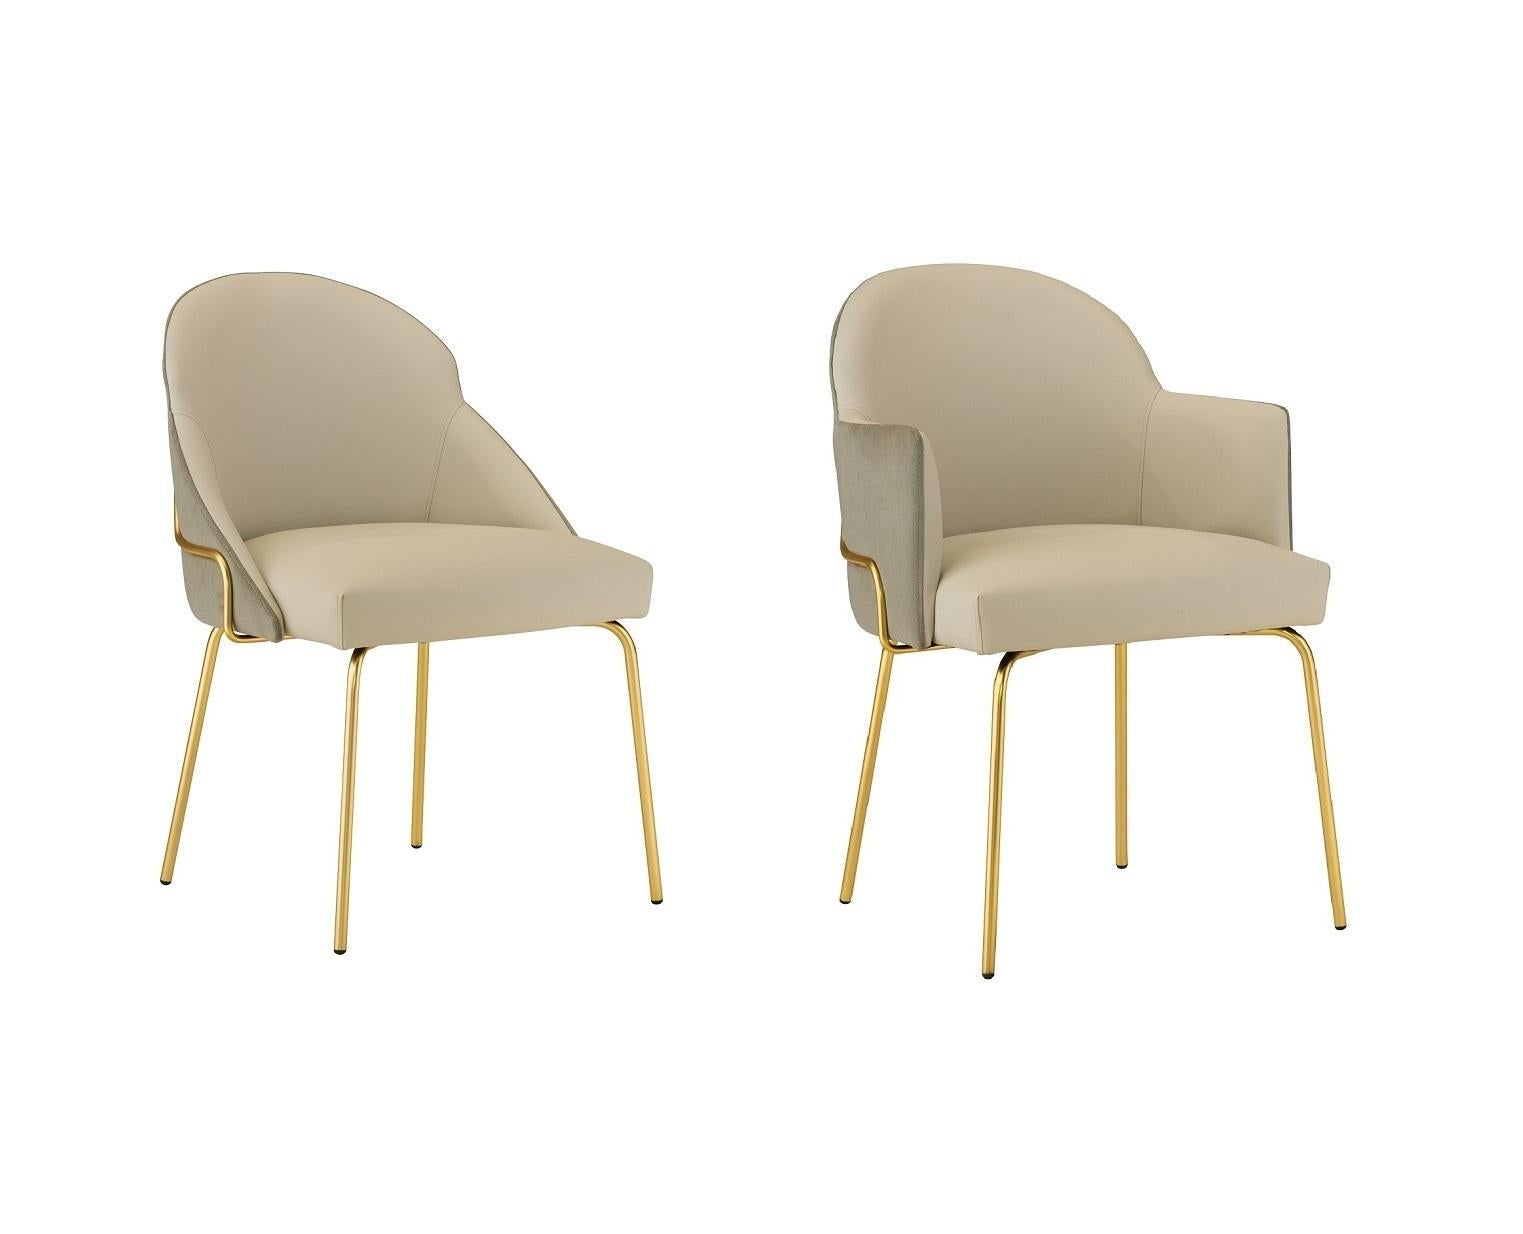 Upholstered seat and back in faux beige leather and taupe fabric.
The chair is offered in a powder coated brass legs with floor protecting glides.
Curved back for greater support and comfort.
Handcrafted in Italy.
Contact us to enquire about COM/COL